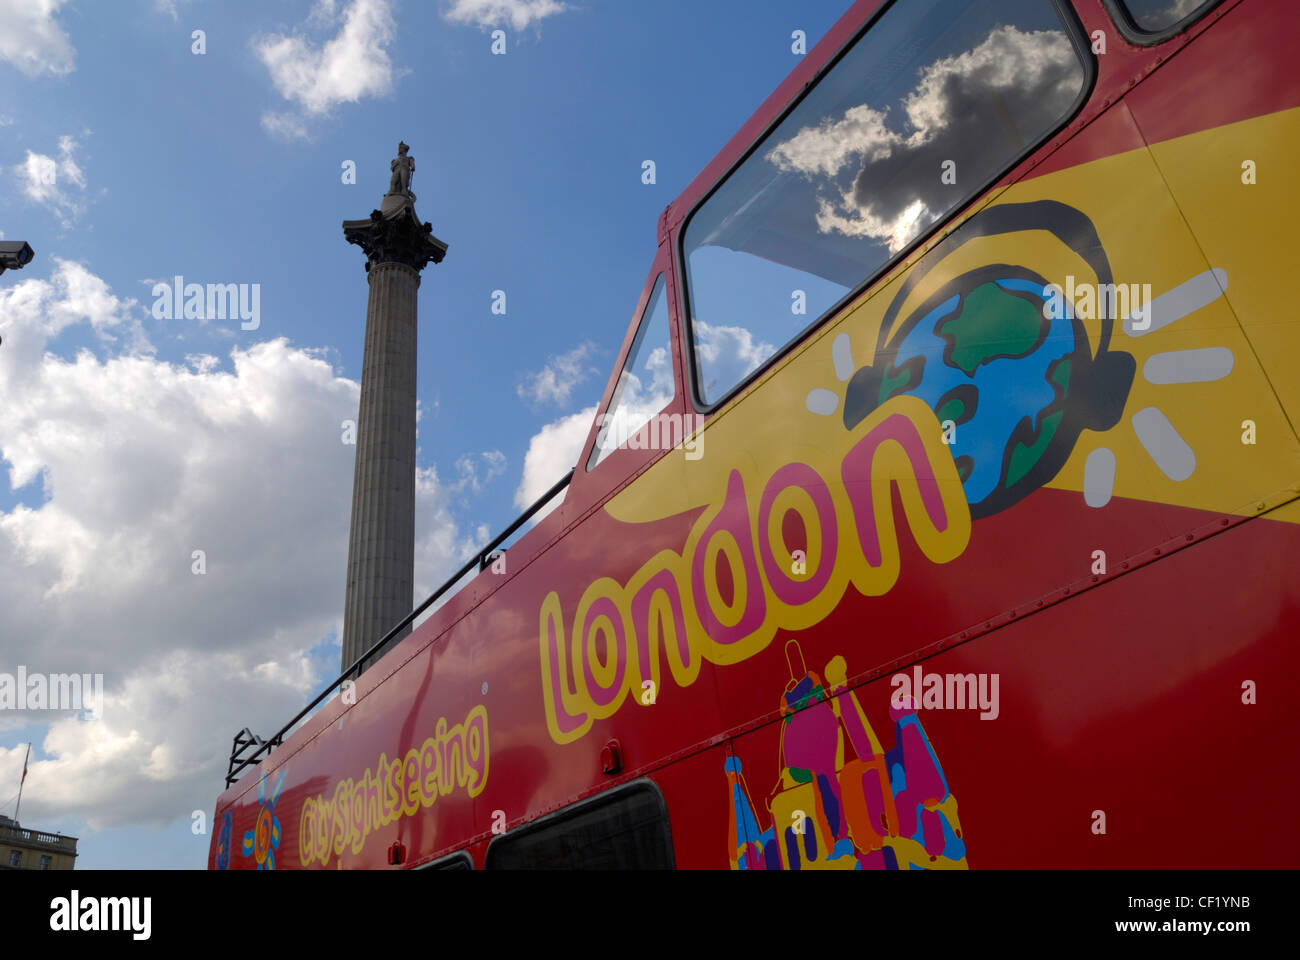 A London City sightseeing bus passing Nelson's Column in Trafalgar Square. Stock Photo